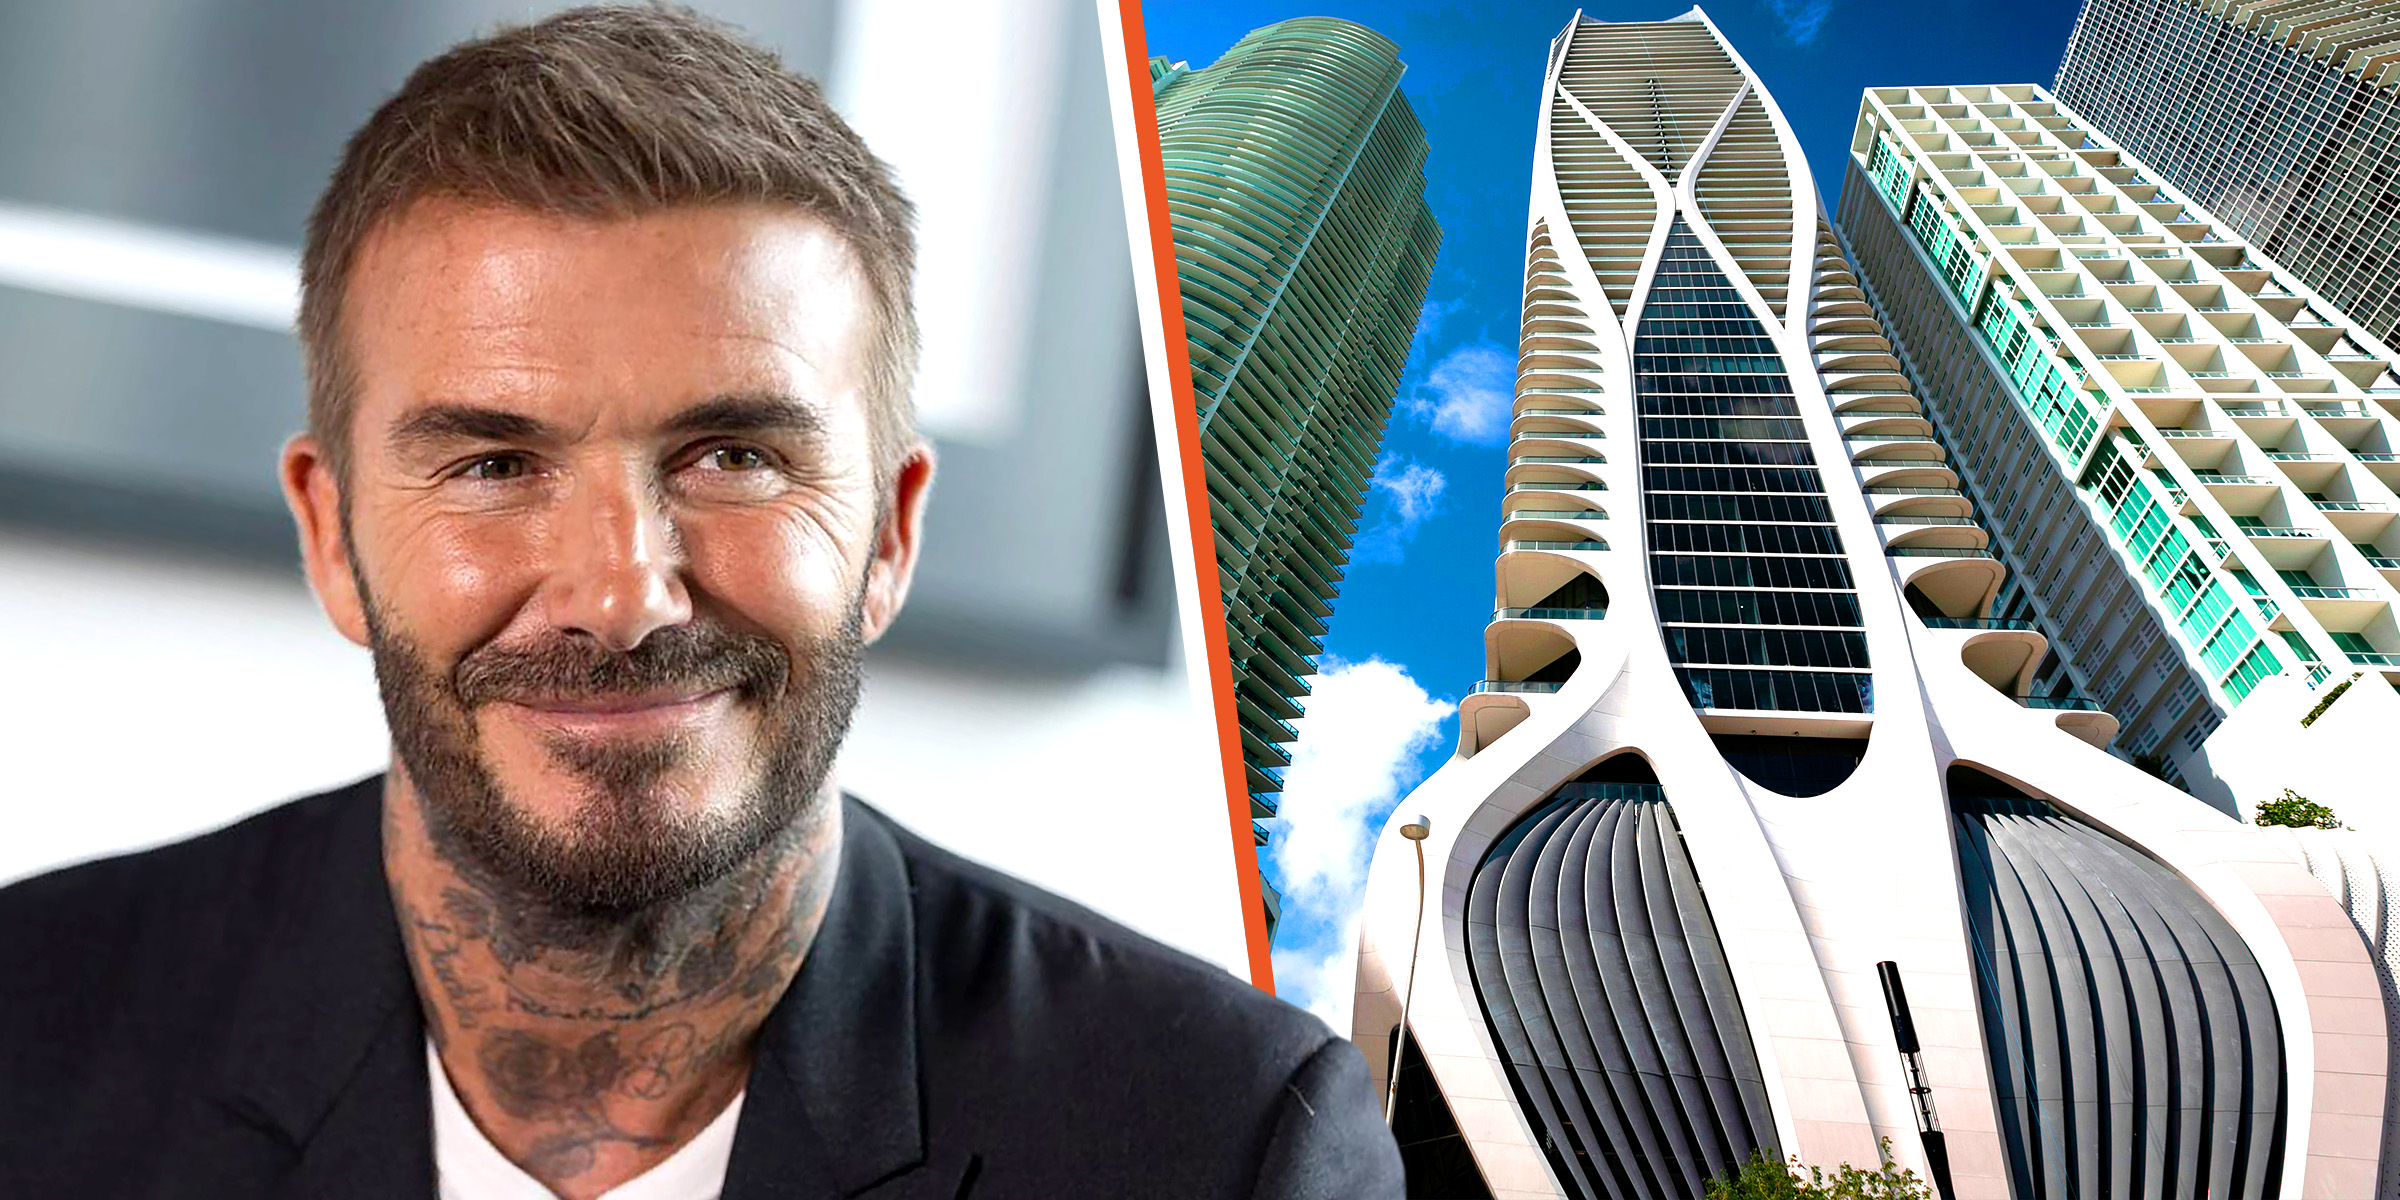 David Beckham | One Thousand Museum building | Source: Getty Images